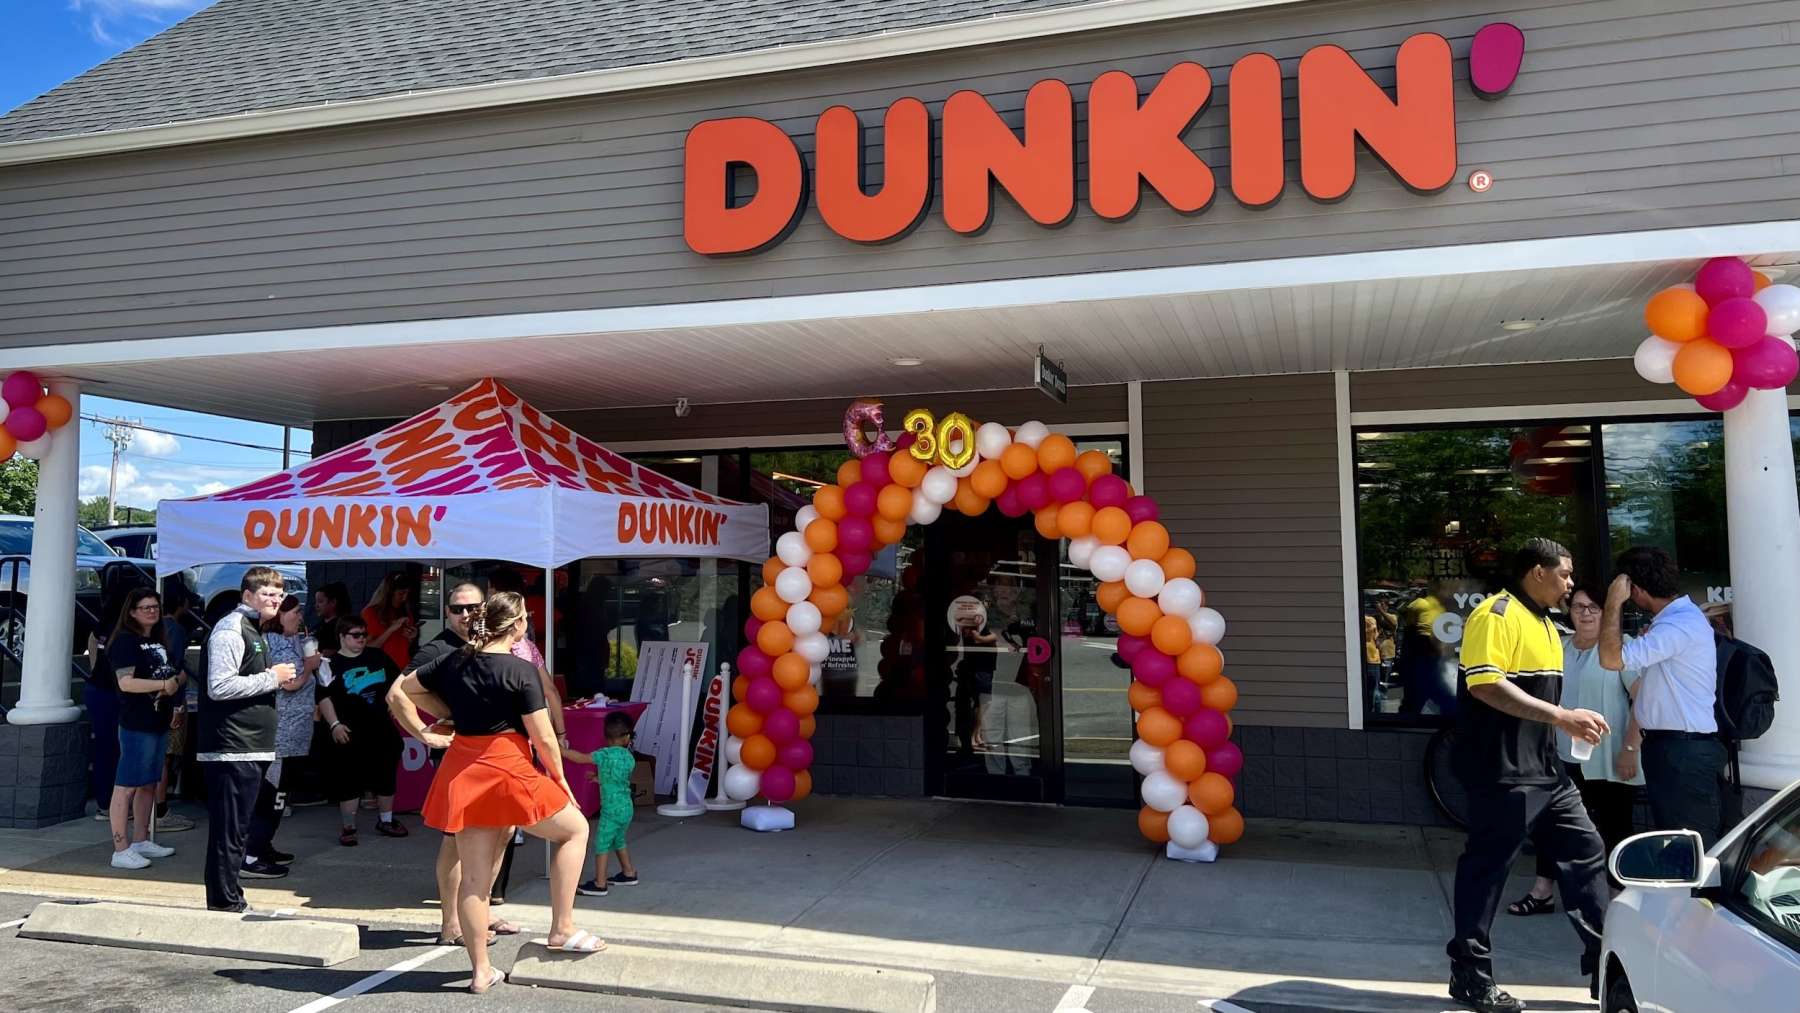 Typo for Dunkin’ promotion in Cranston offers free offer to “White” residents